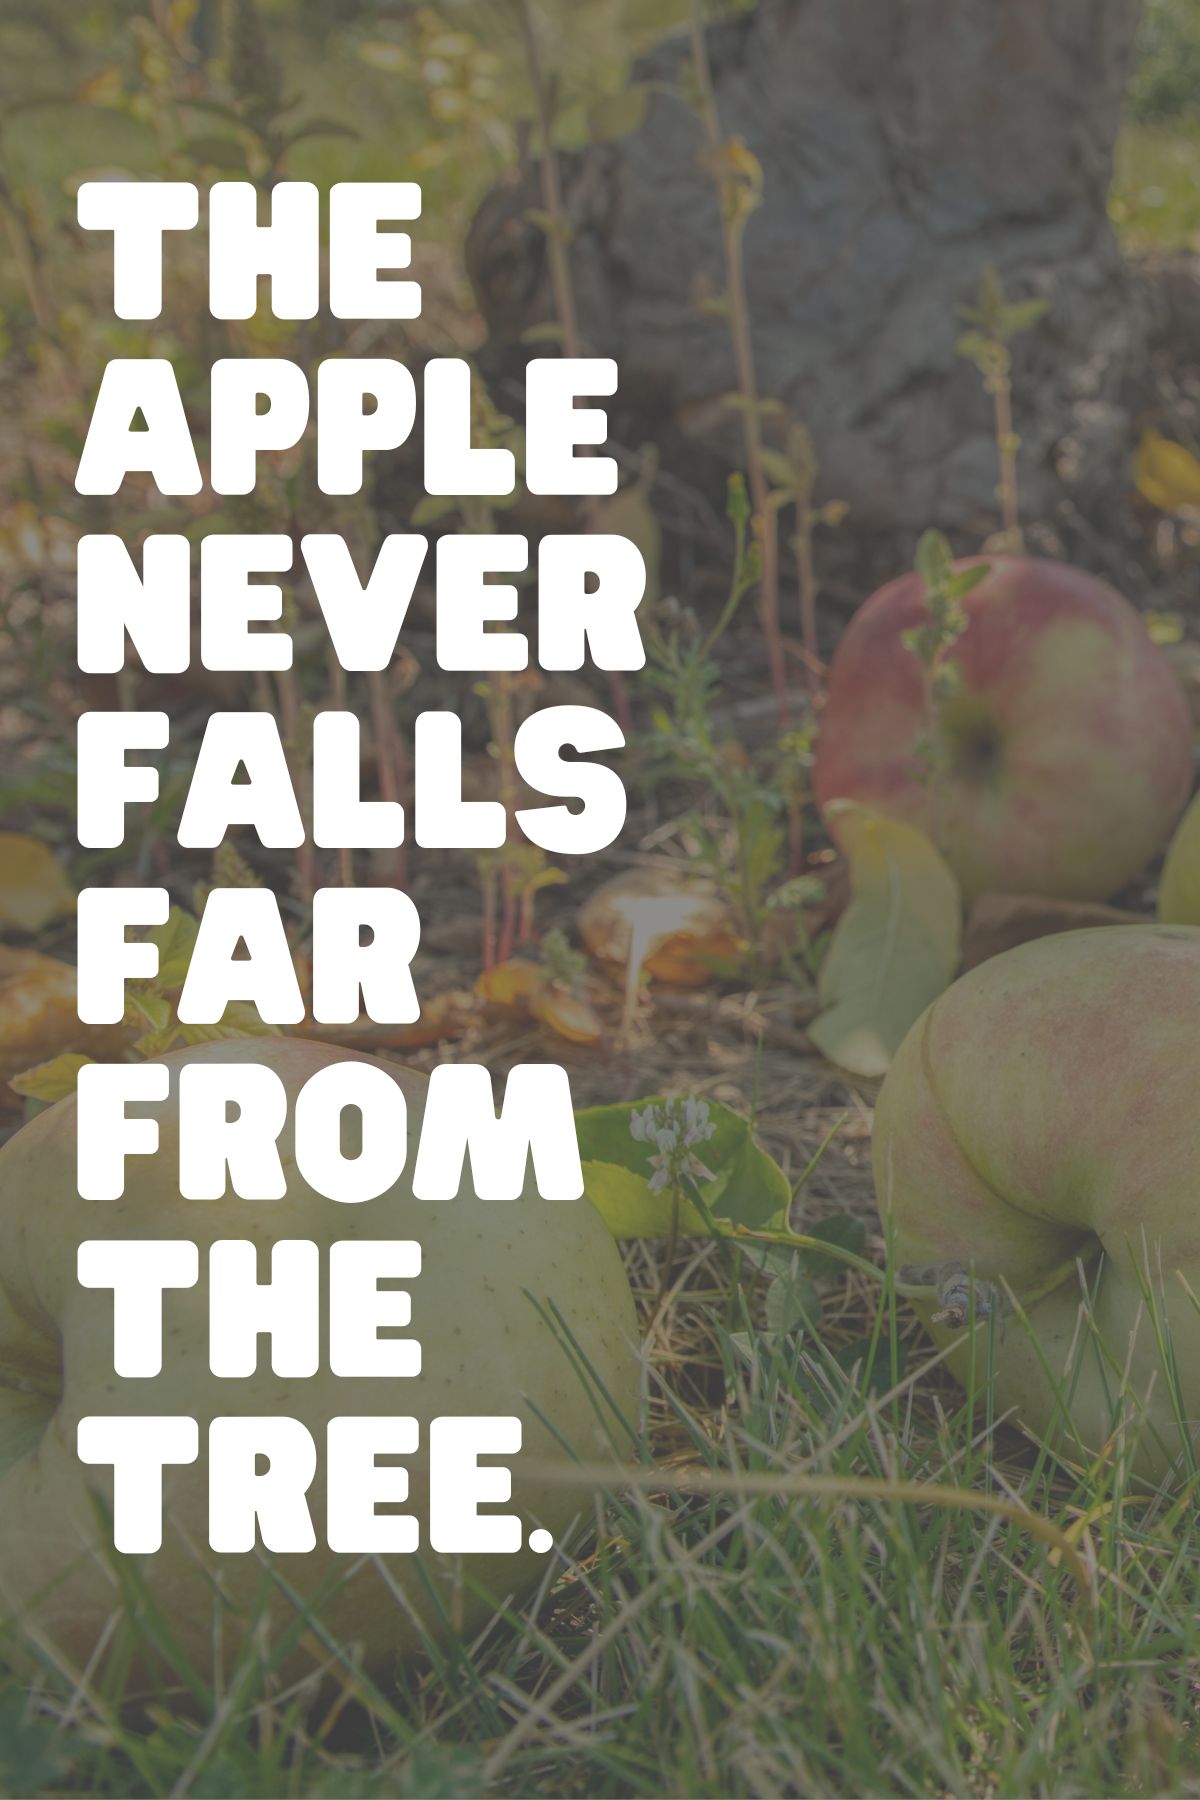 apple saying "The apple never falls far from the tree"